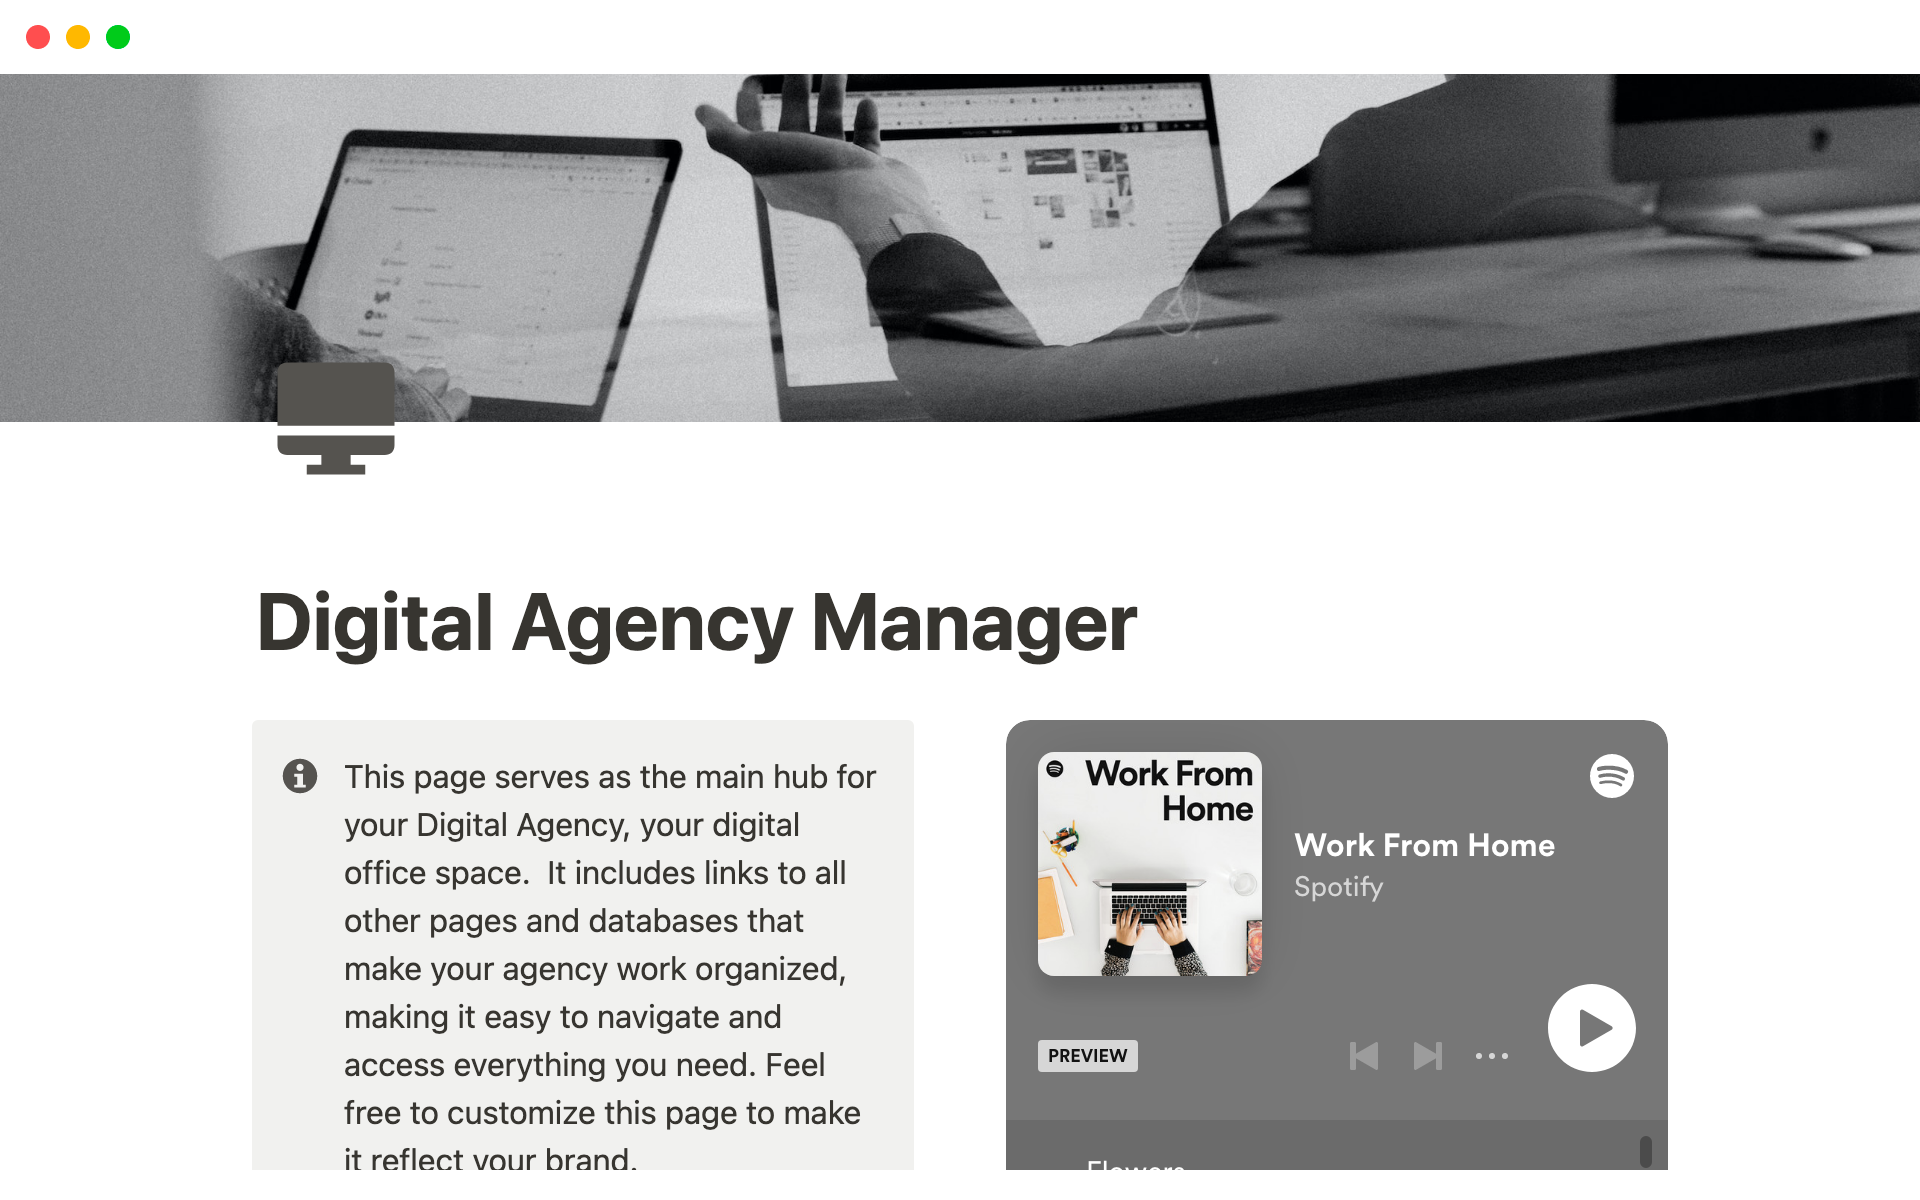 Digital Agency Manager: A customizable Notion template with centralized dashboards, project tracking, financial management tools, and resources to help your agency grow.